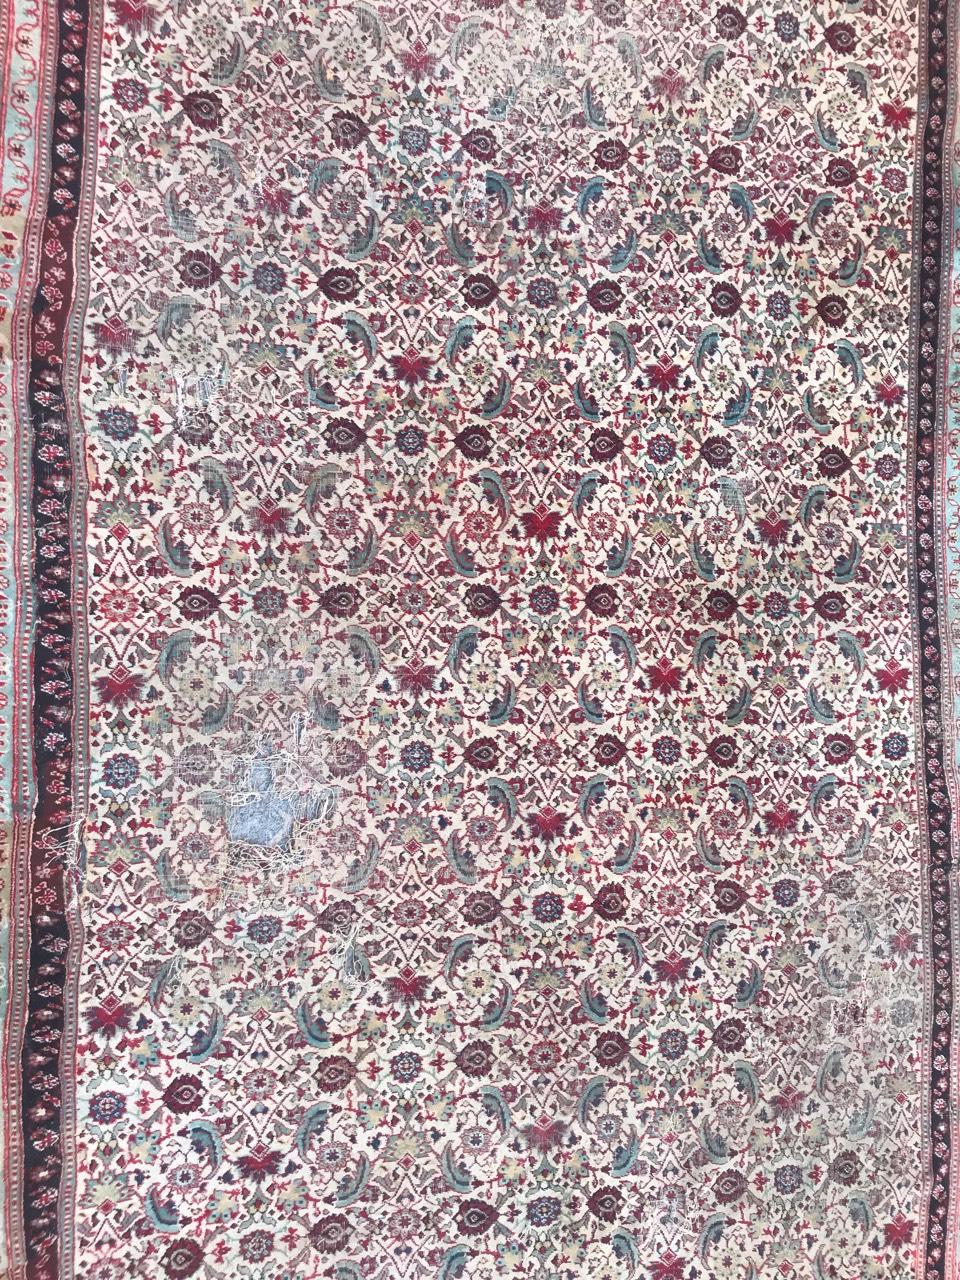 Beautiful and decorative antique Indian Agra rug with a white field and Herati design with red and green colors, accidents and damaged with old reparations. Entirely hand knotted with wool velvet on cotton foundation.